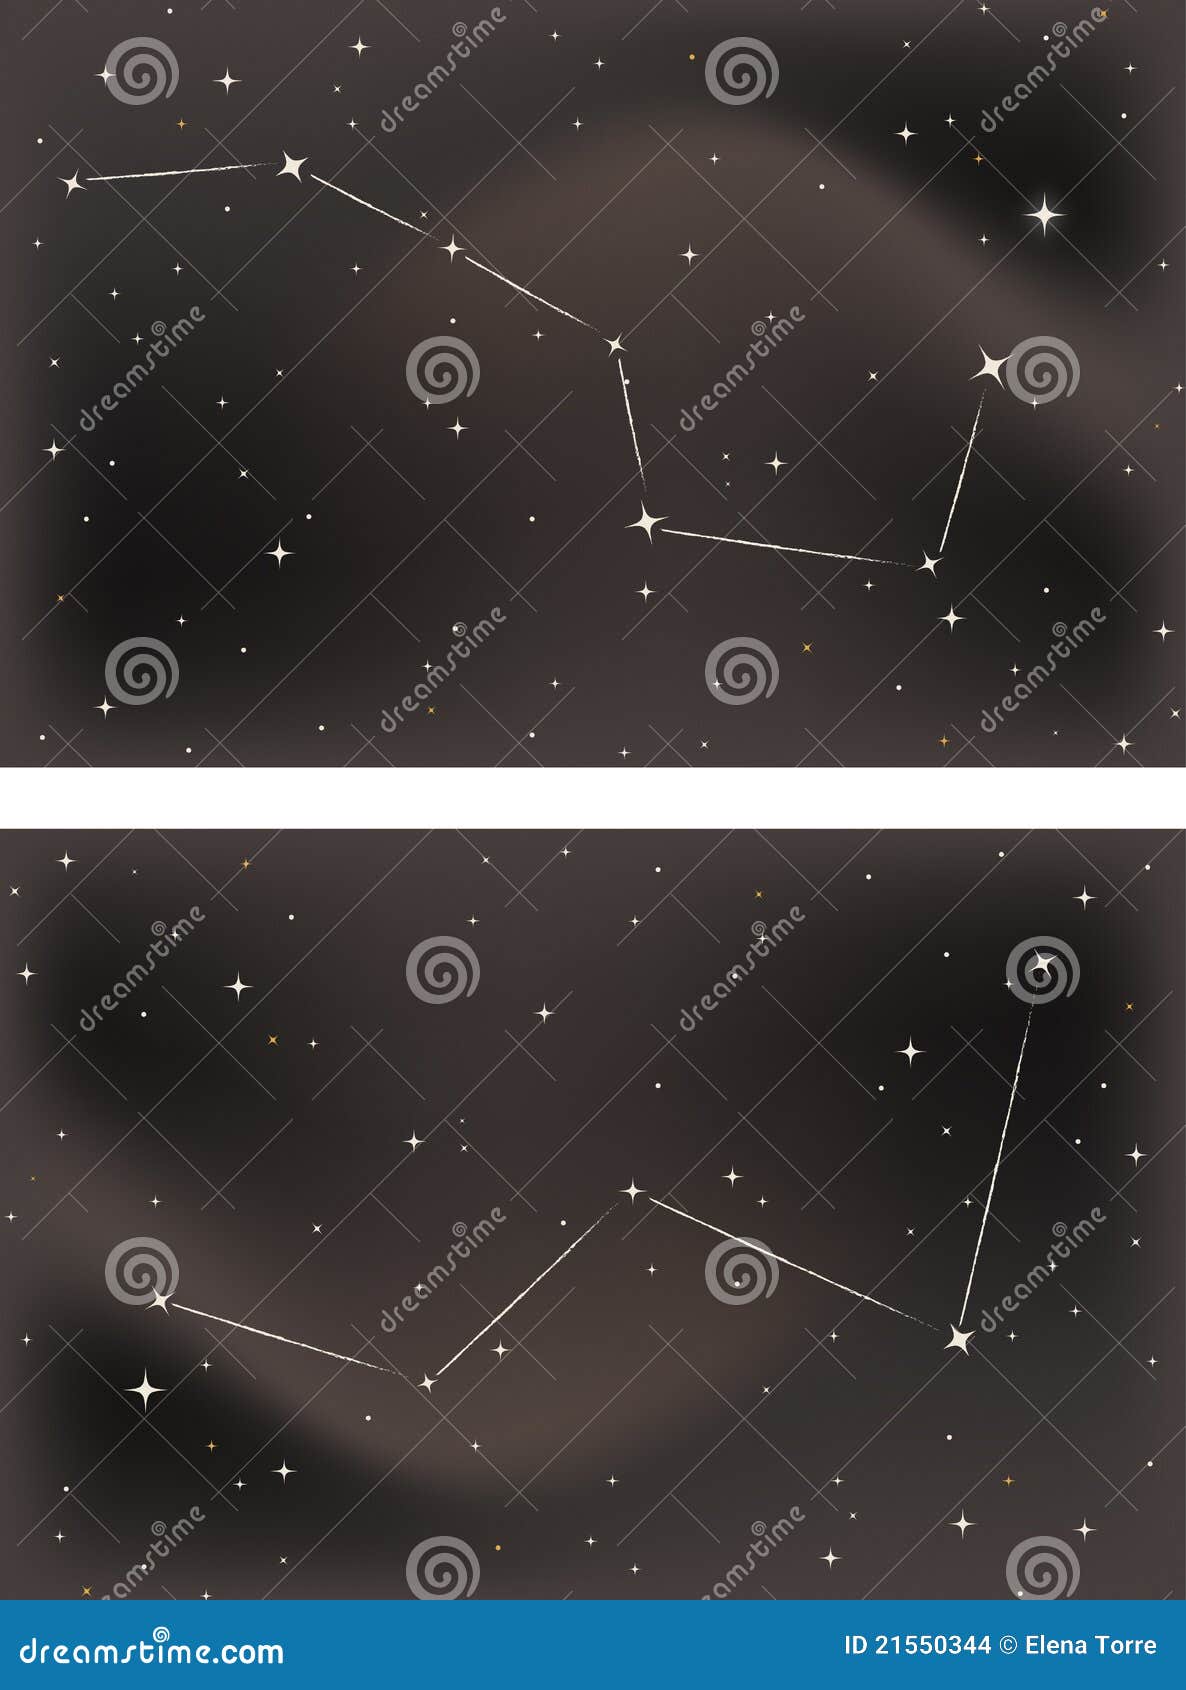 the big dipper and cassiopeia